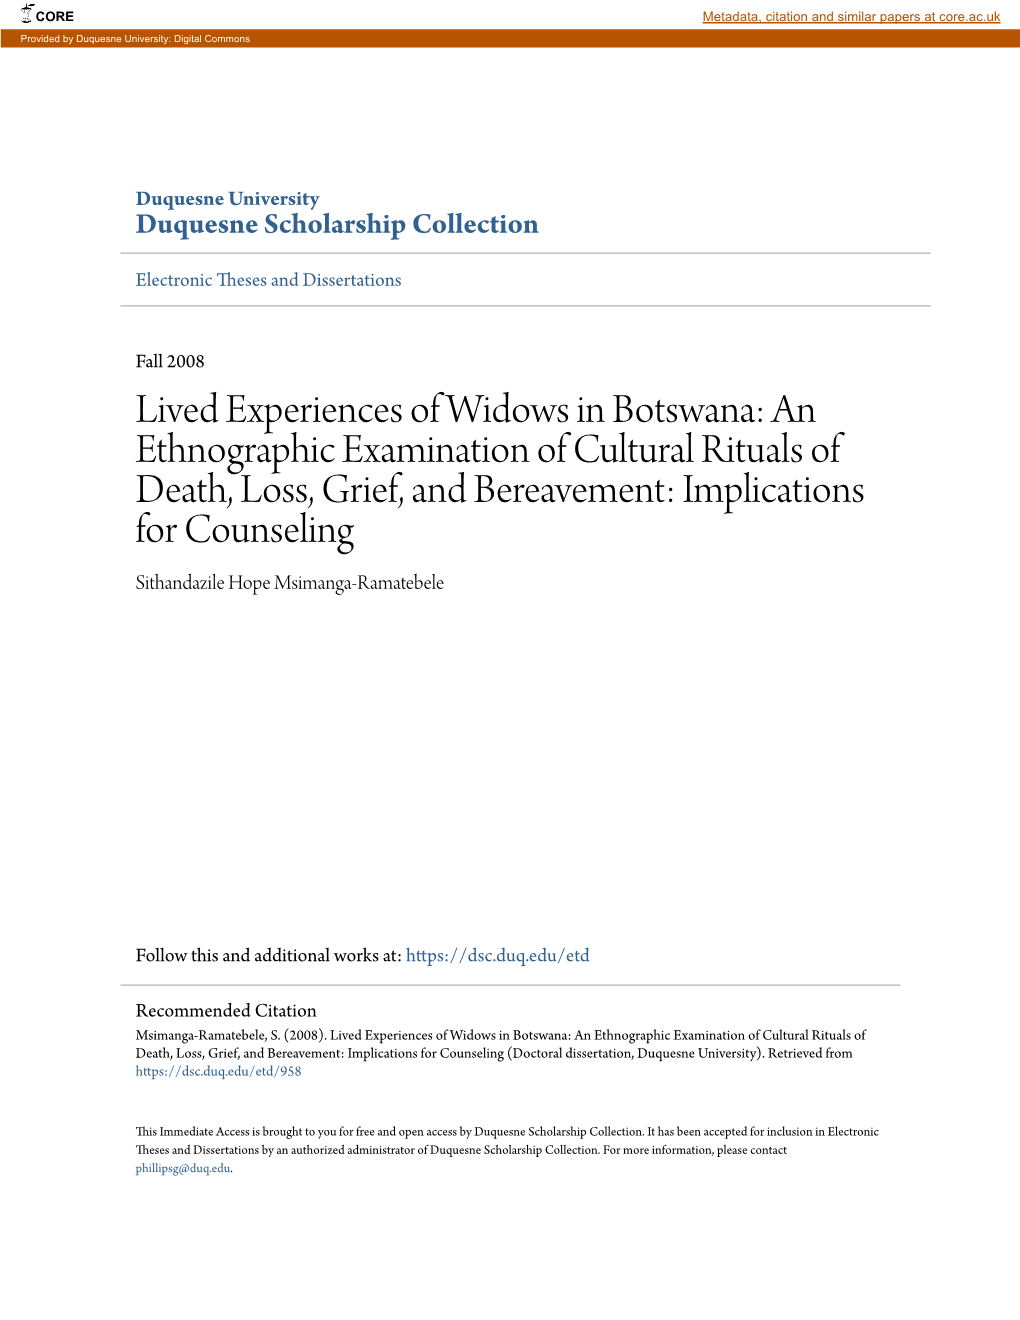 Lived Experiences of Widows in Botswana: An